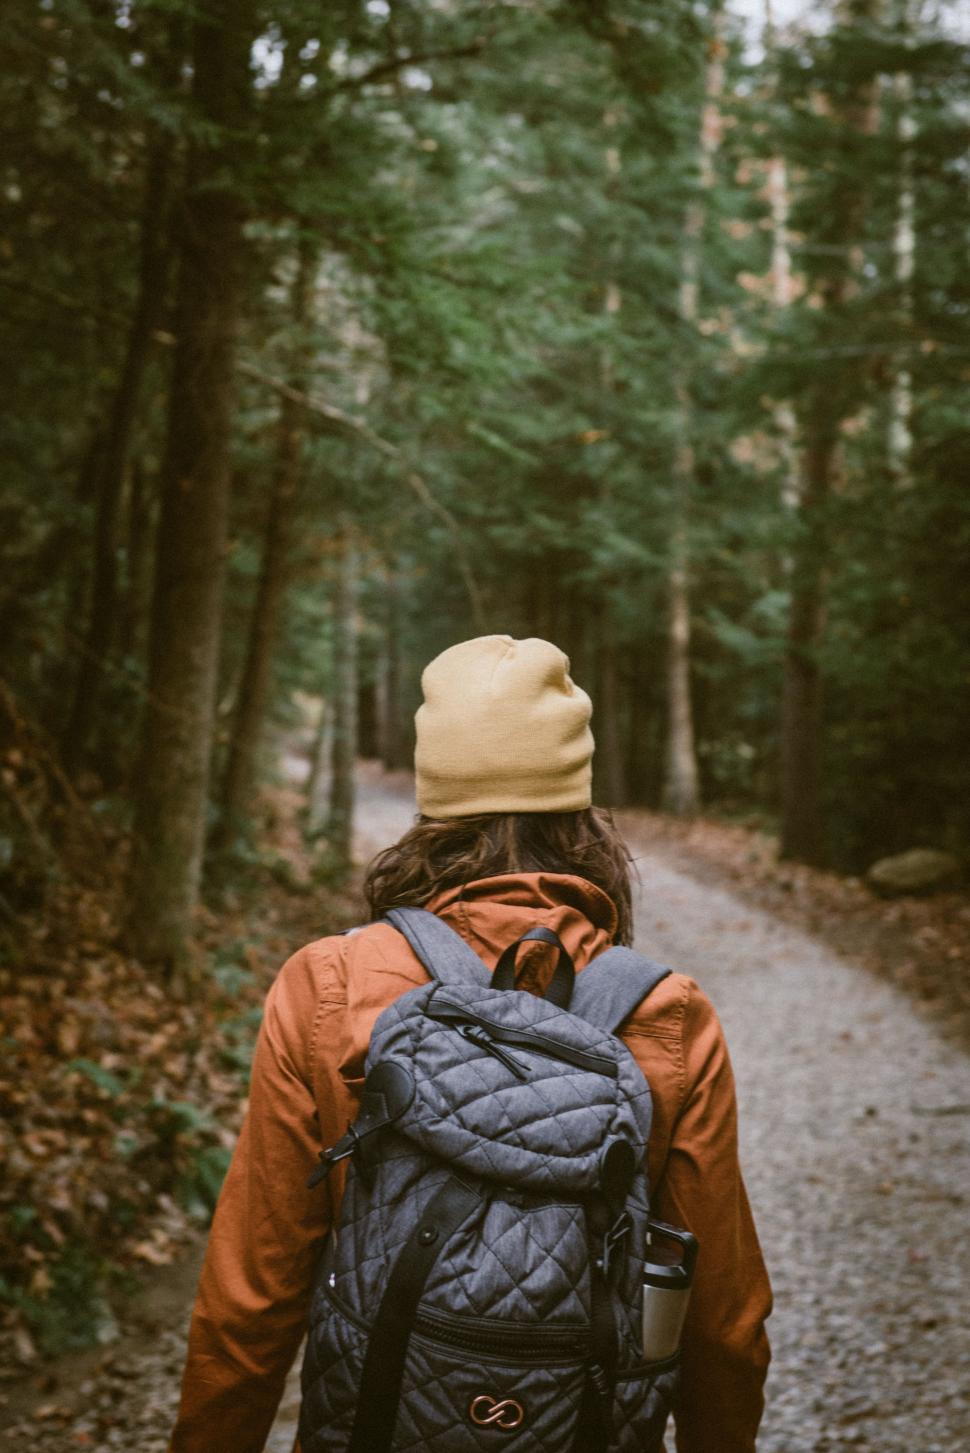 Free Image of Person Walking Down a Path in the Woods 